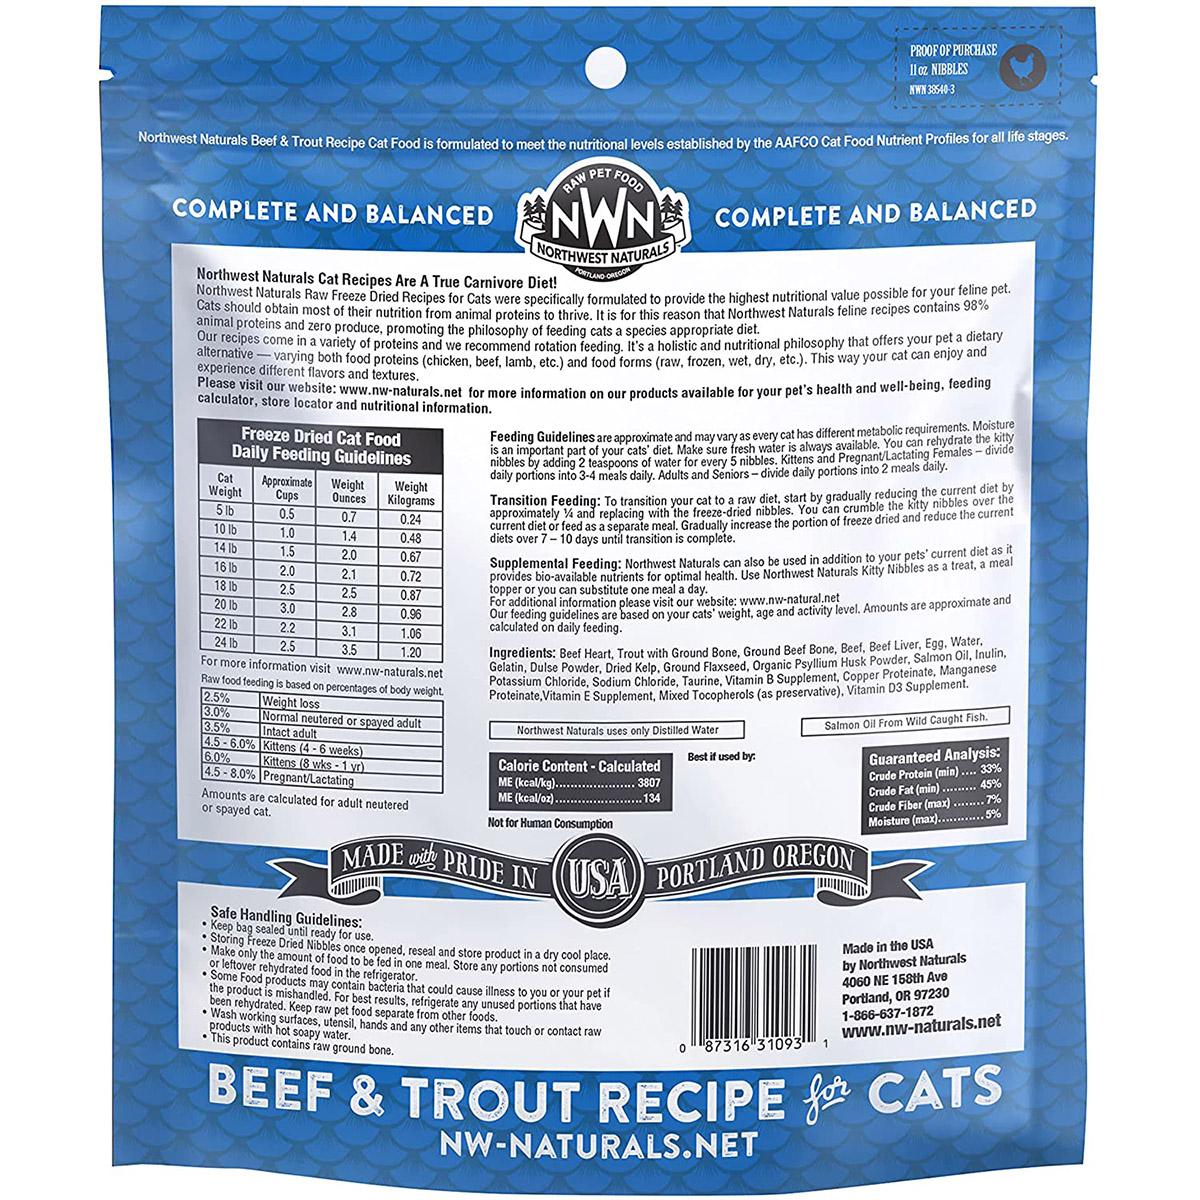 Northwest Naturals Freeze Dried Beef & Trout Recipe for Cats